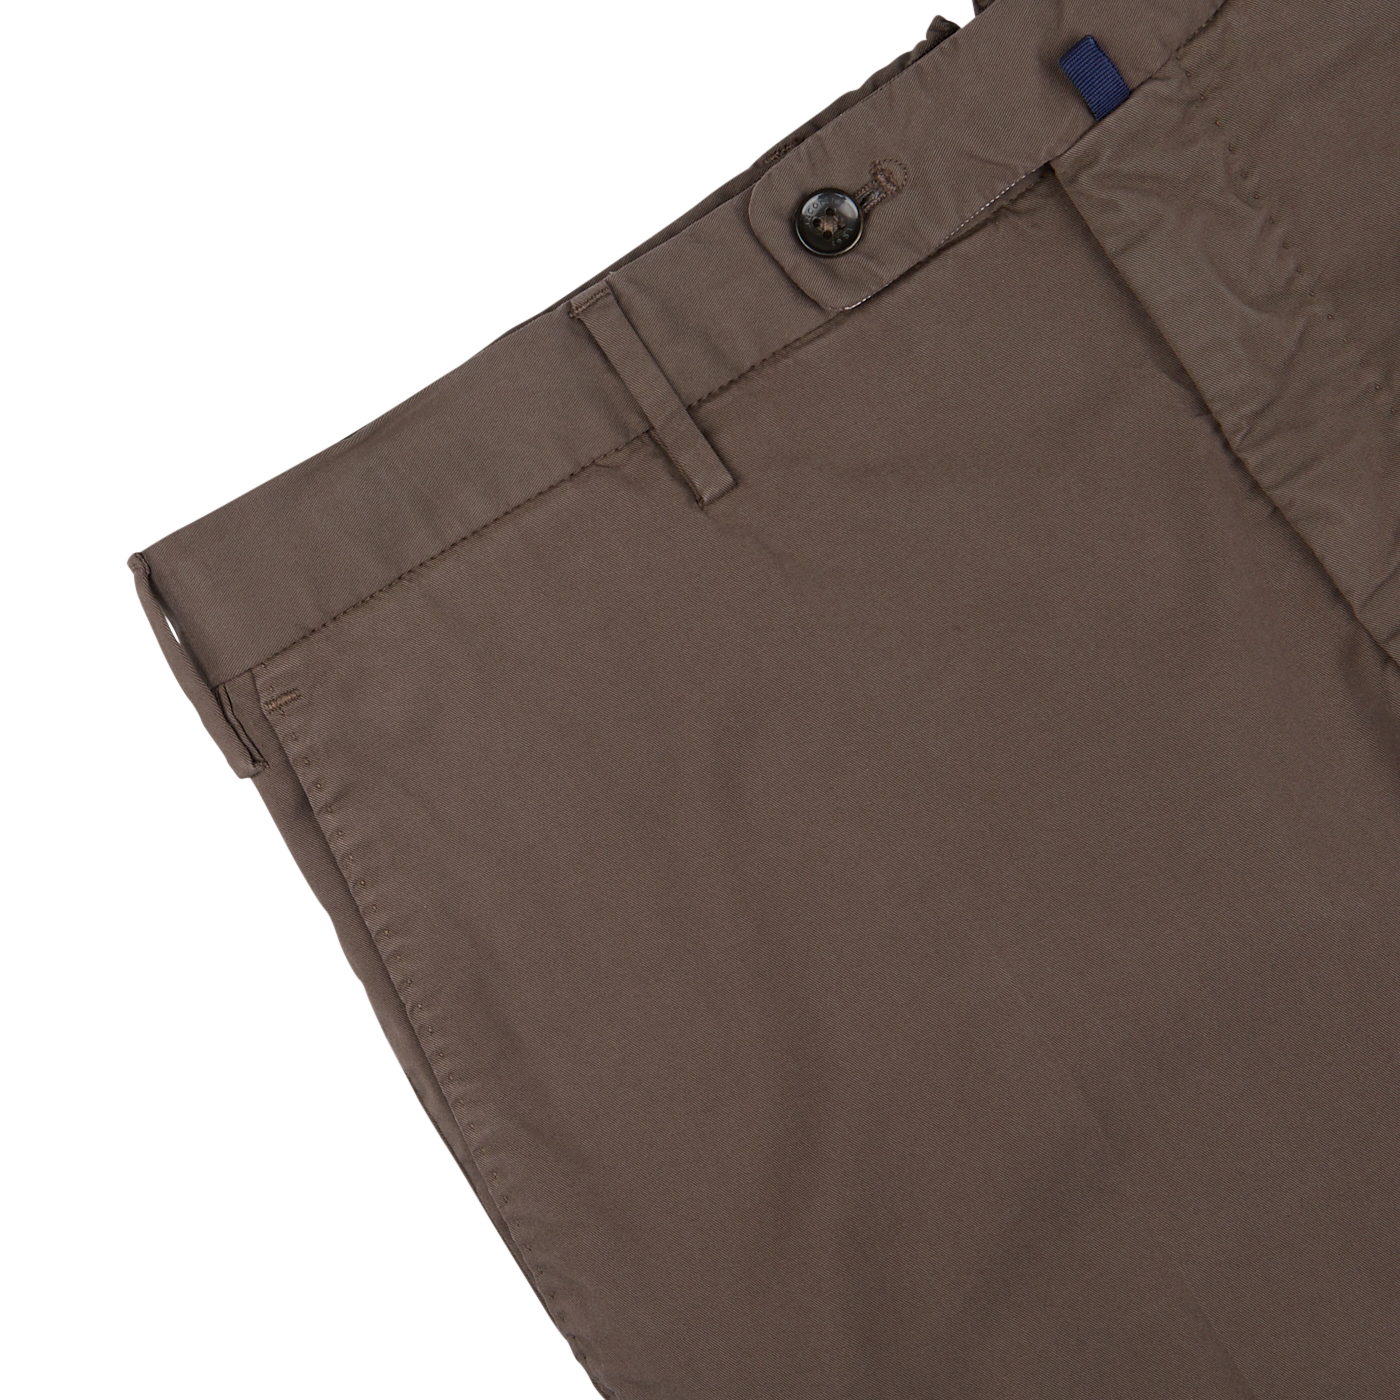 Close-up of Incotex dark brown cotton stretch regular chinos with a button closure on a white background.